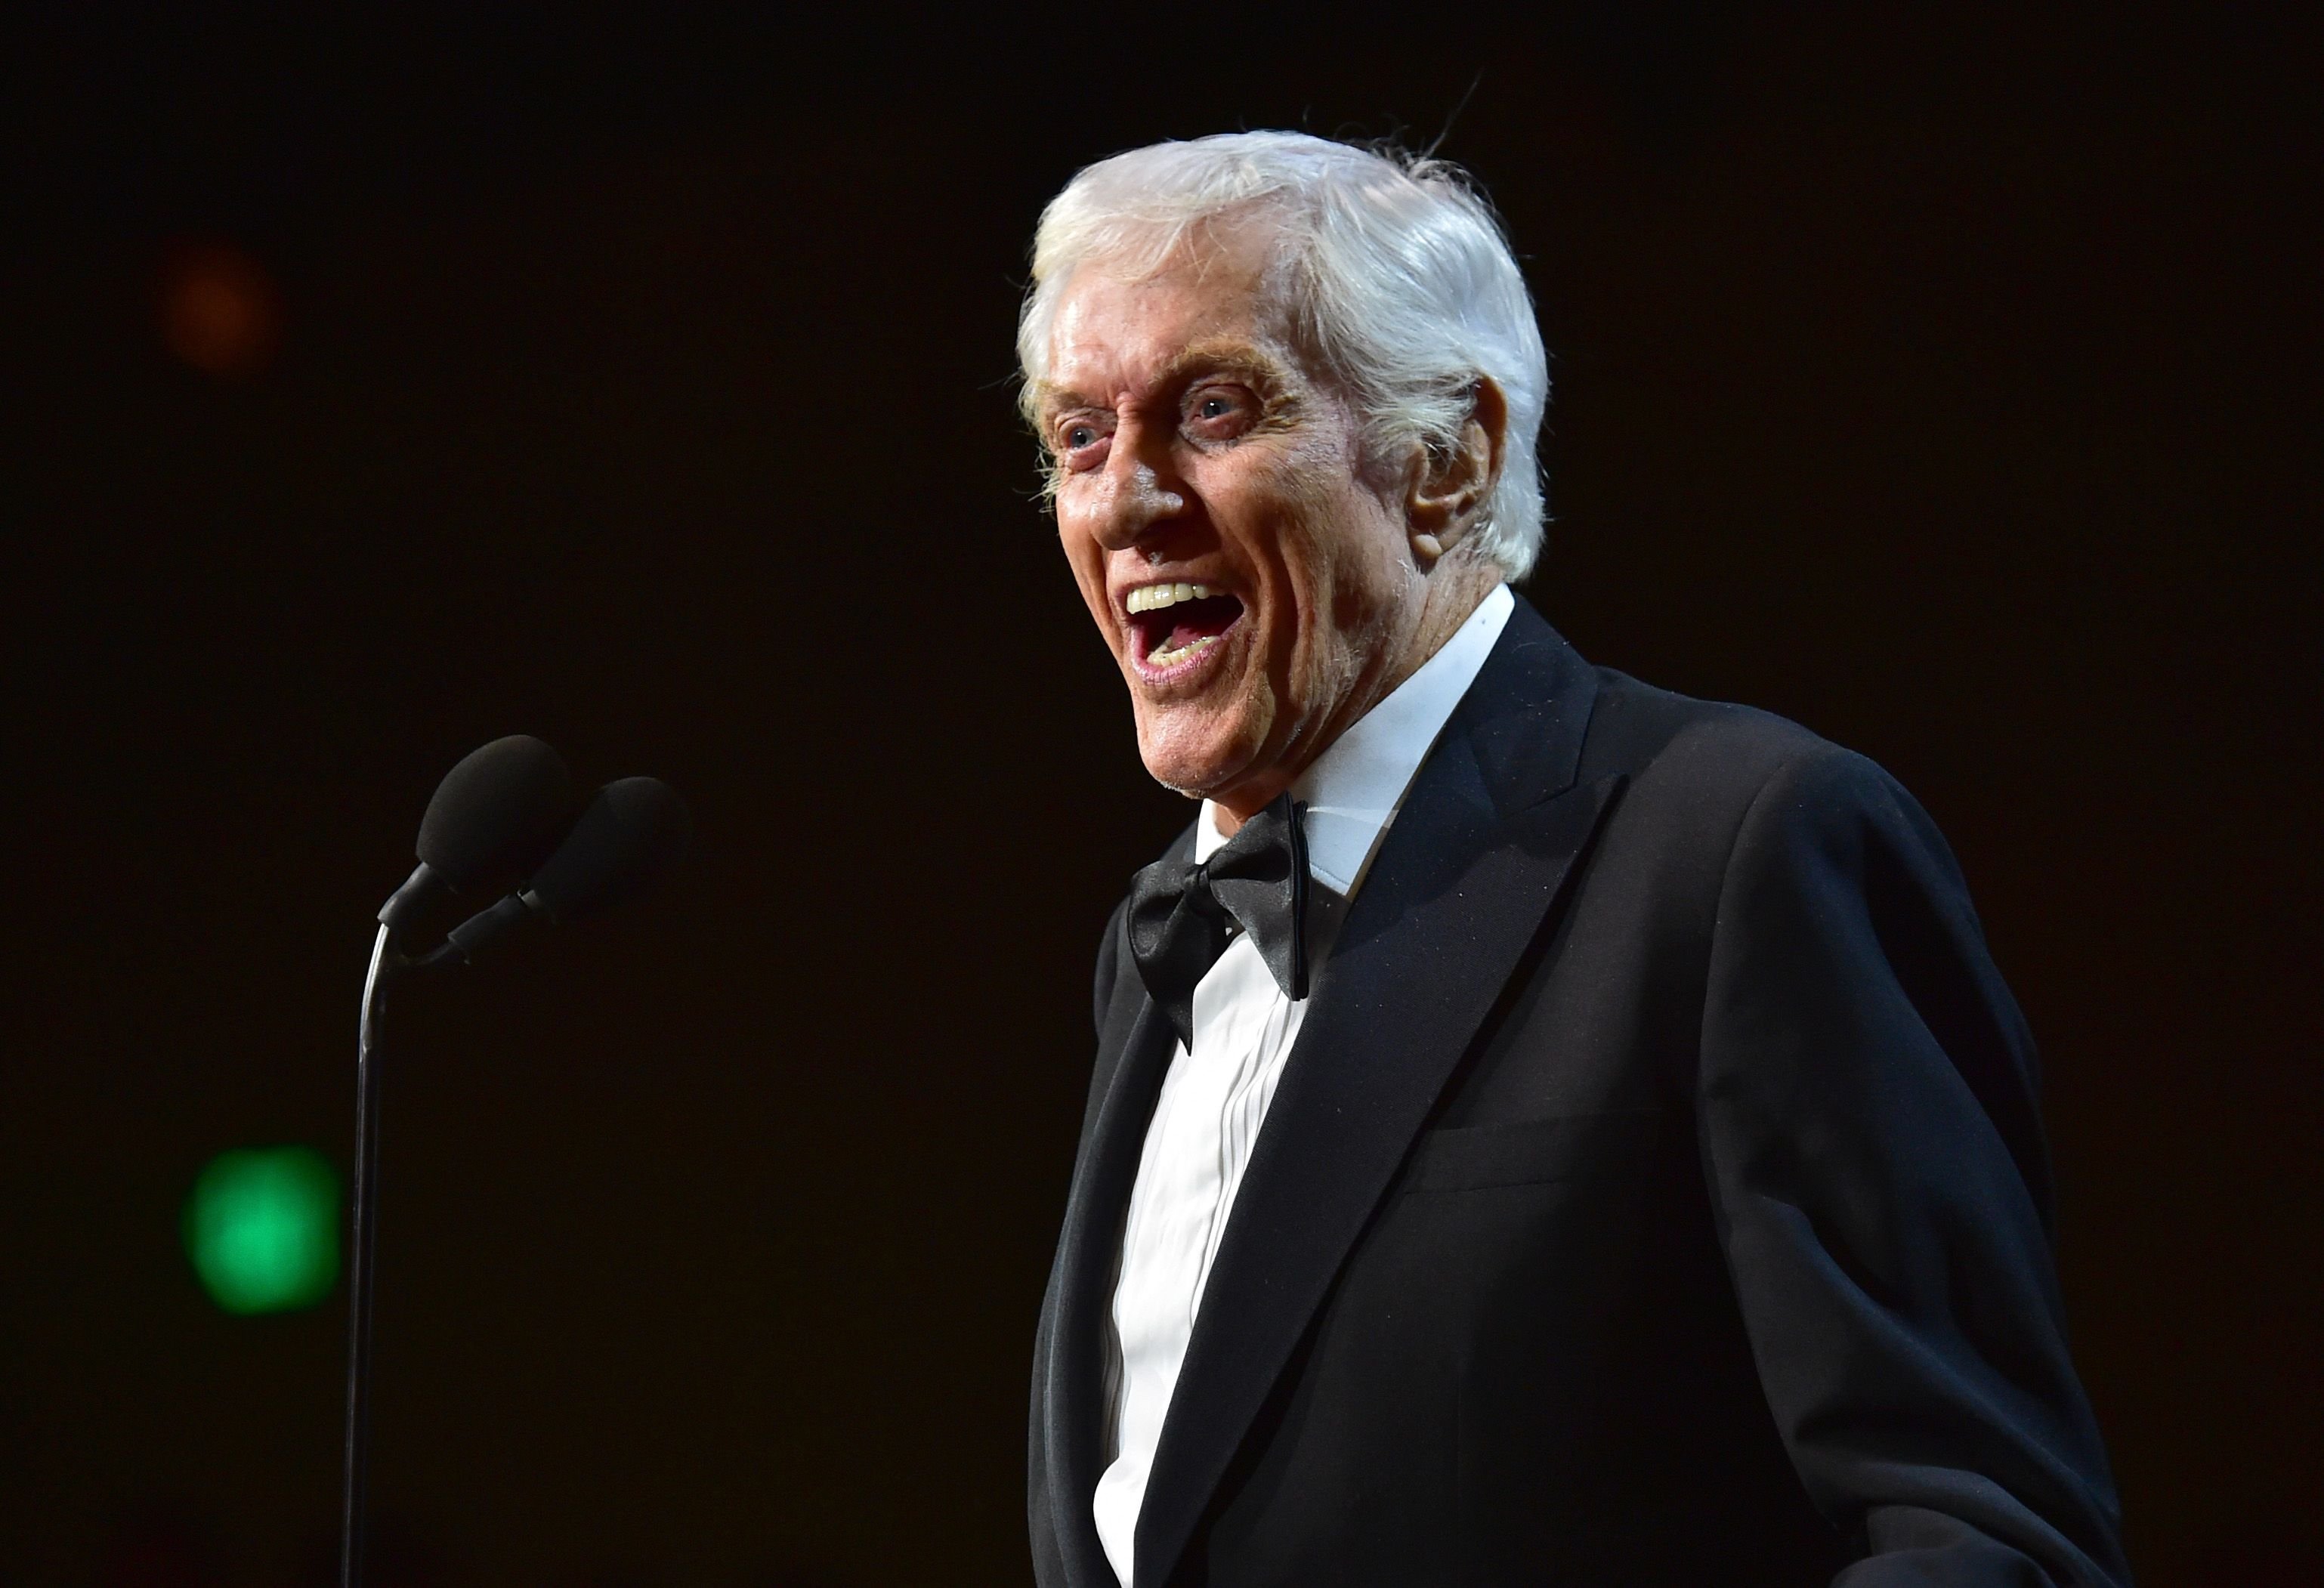 Dick Van Dyke accepts the Britannia Award for Excellence in Television at the 2017 AMD British Academy Britannia Awards at The Beverly Hilton Hotel on October 27, 2017 in California. | Photo: Getty Images